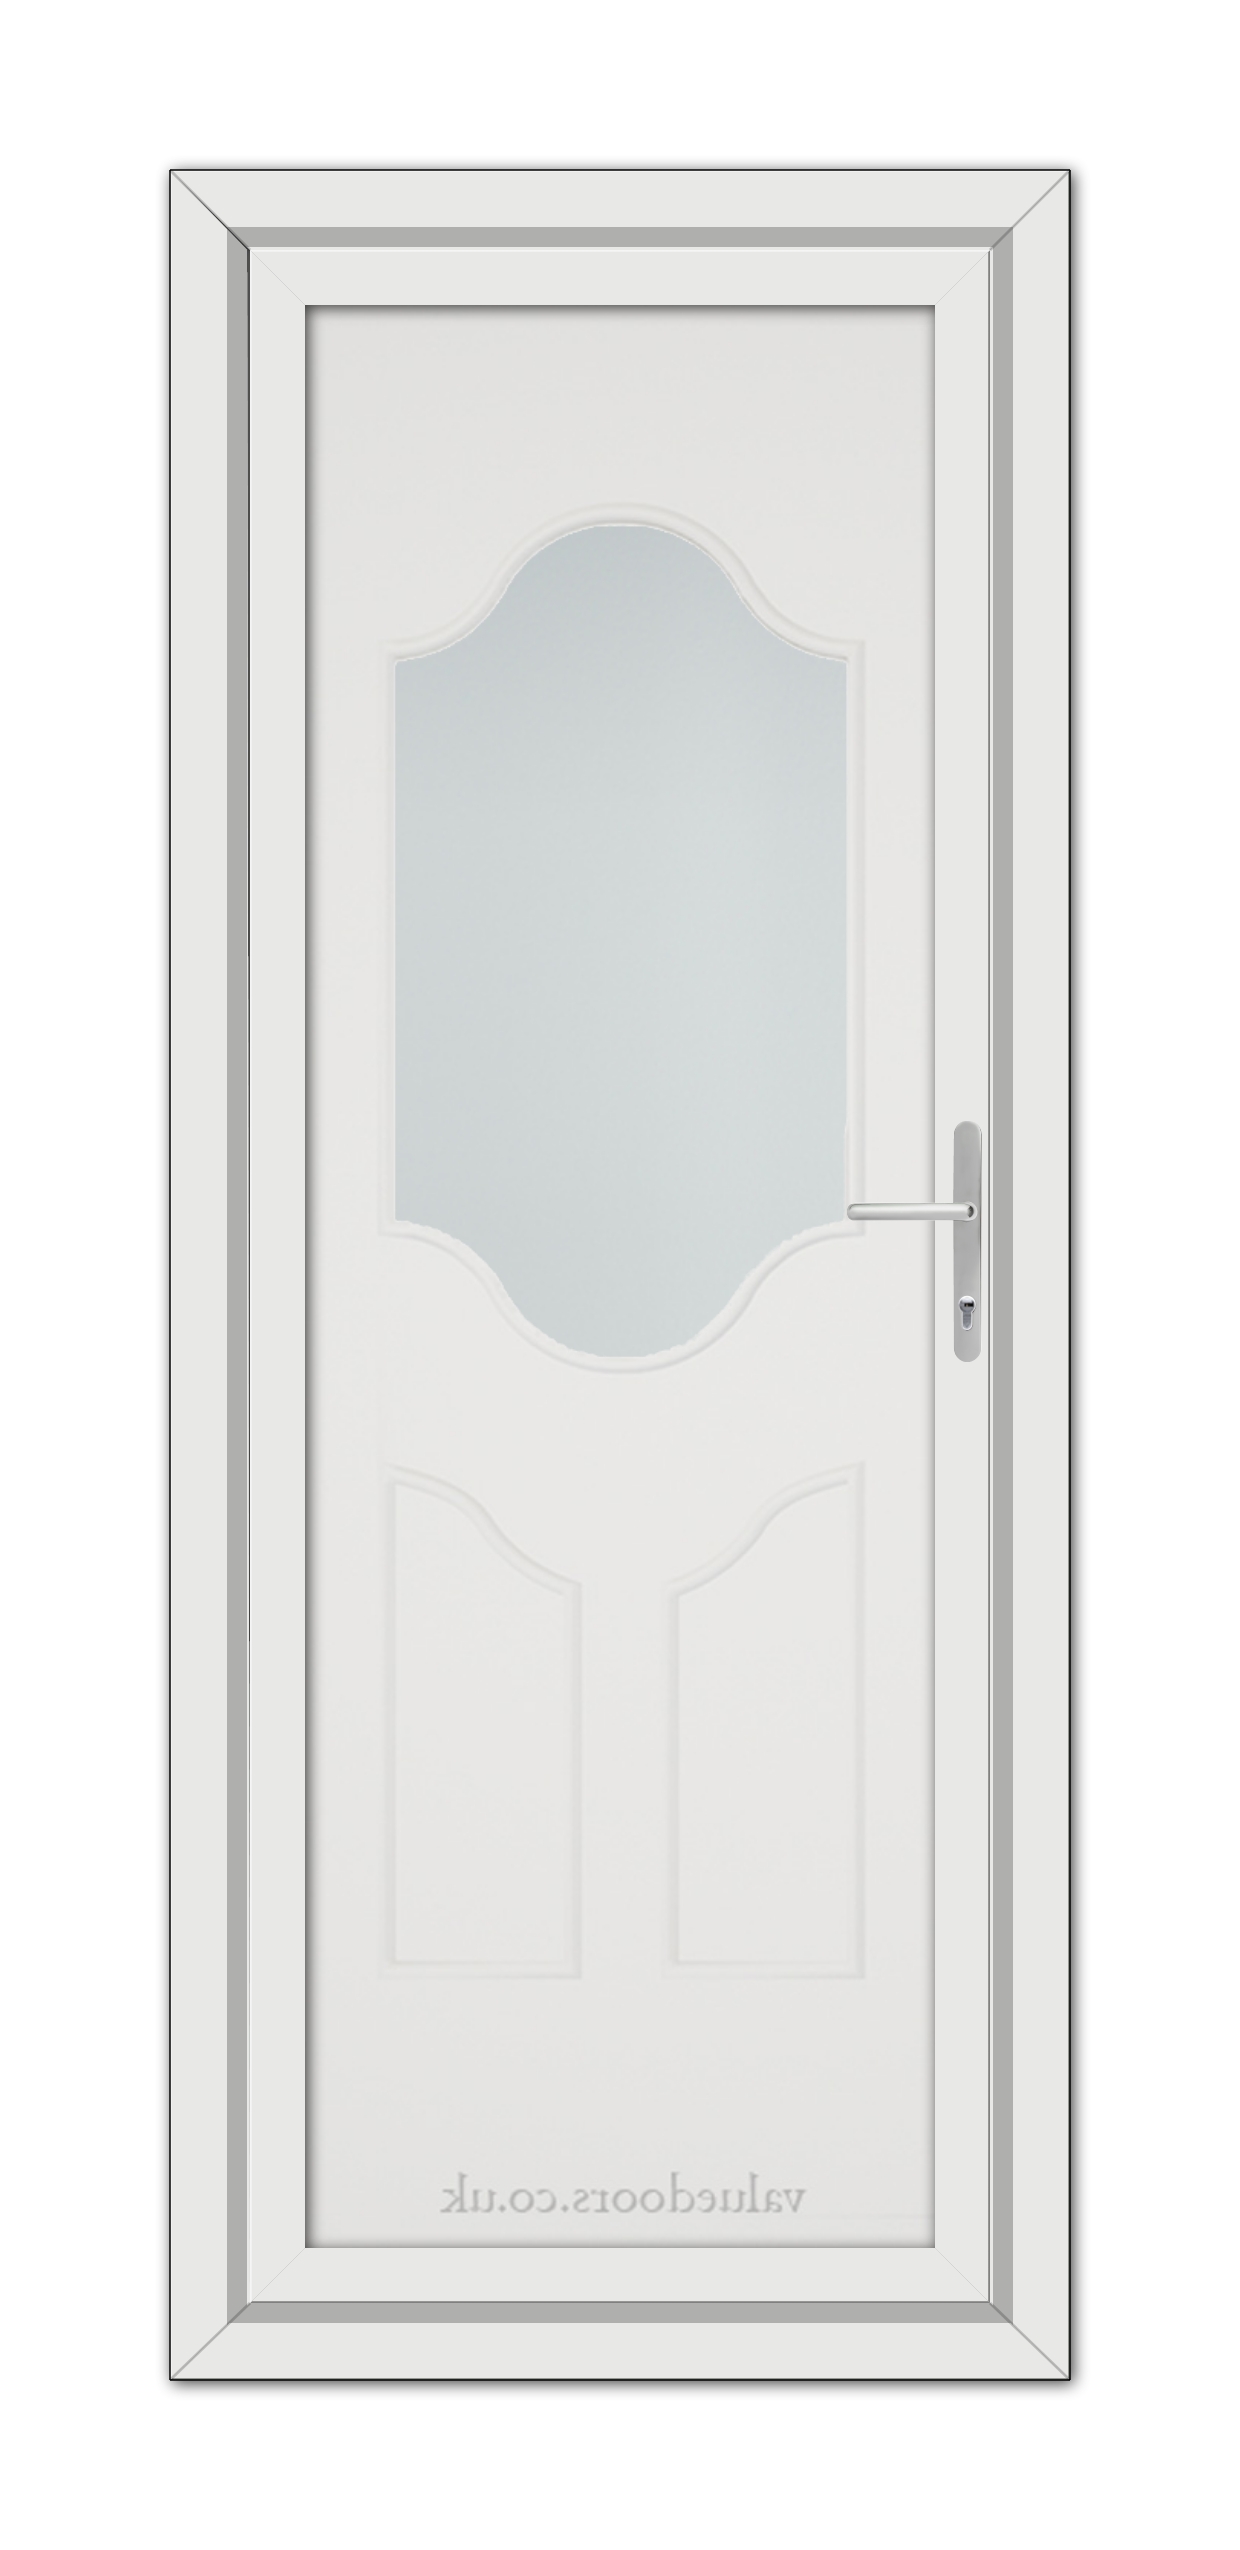 A vertical image of a White Althorpe One uPVC Door with an upper arch-shaped glass pane and a modern handle, featuring a "luckydoor.co" watermark at the bottom.